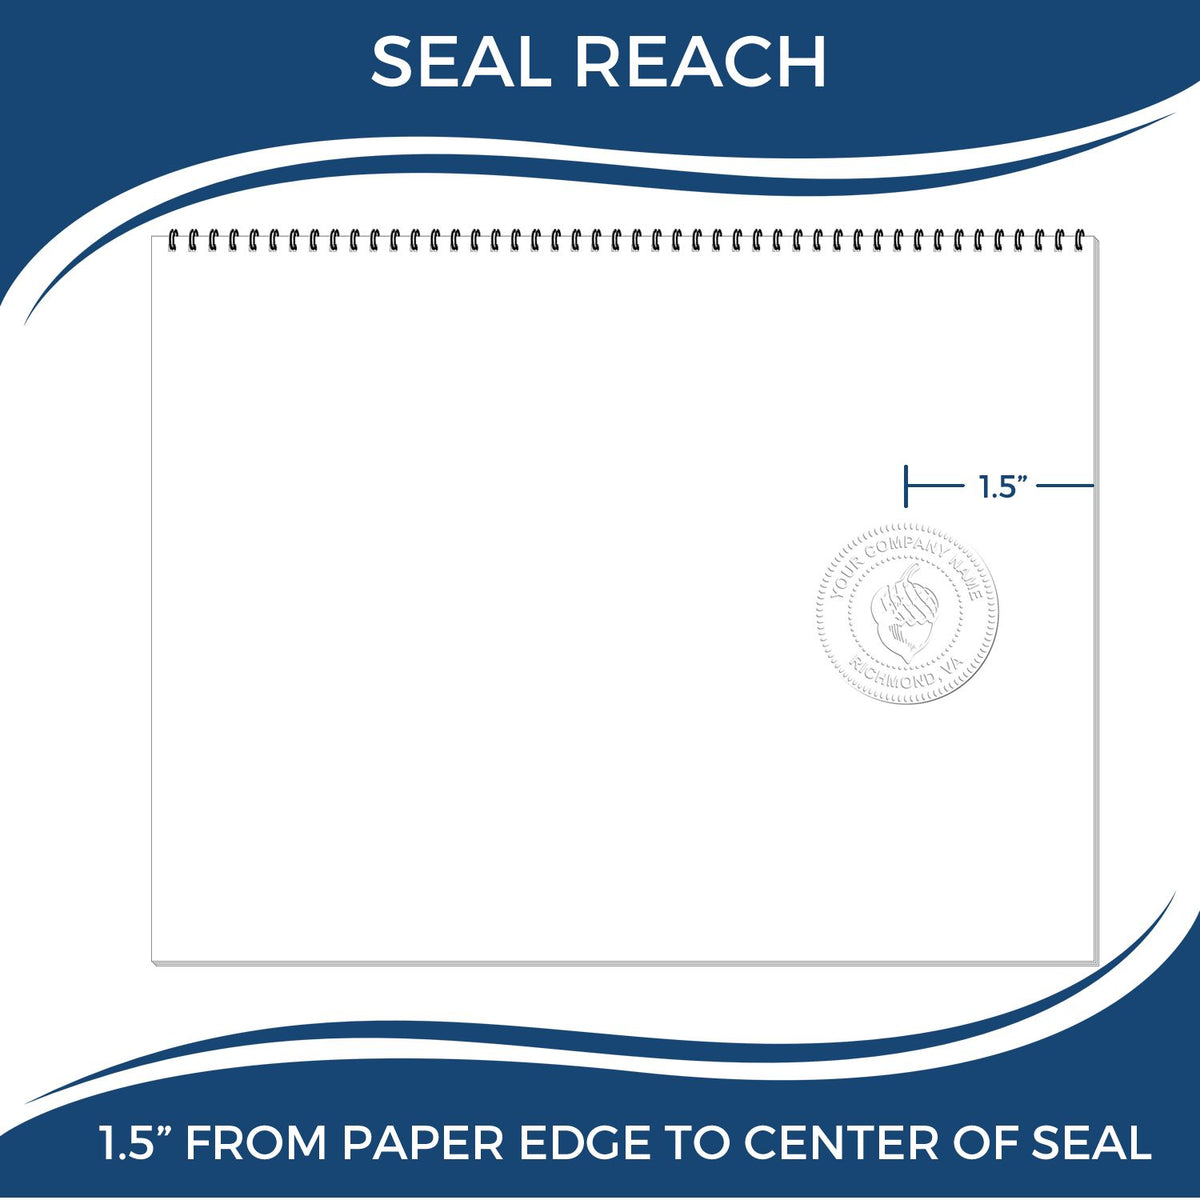 An infographic showing the seal reach which is represented by a ruler and a miniature seal image of the Indiana Geologist Desk Seal